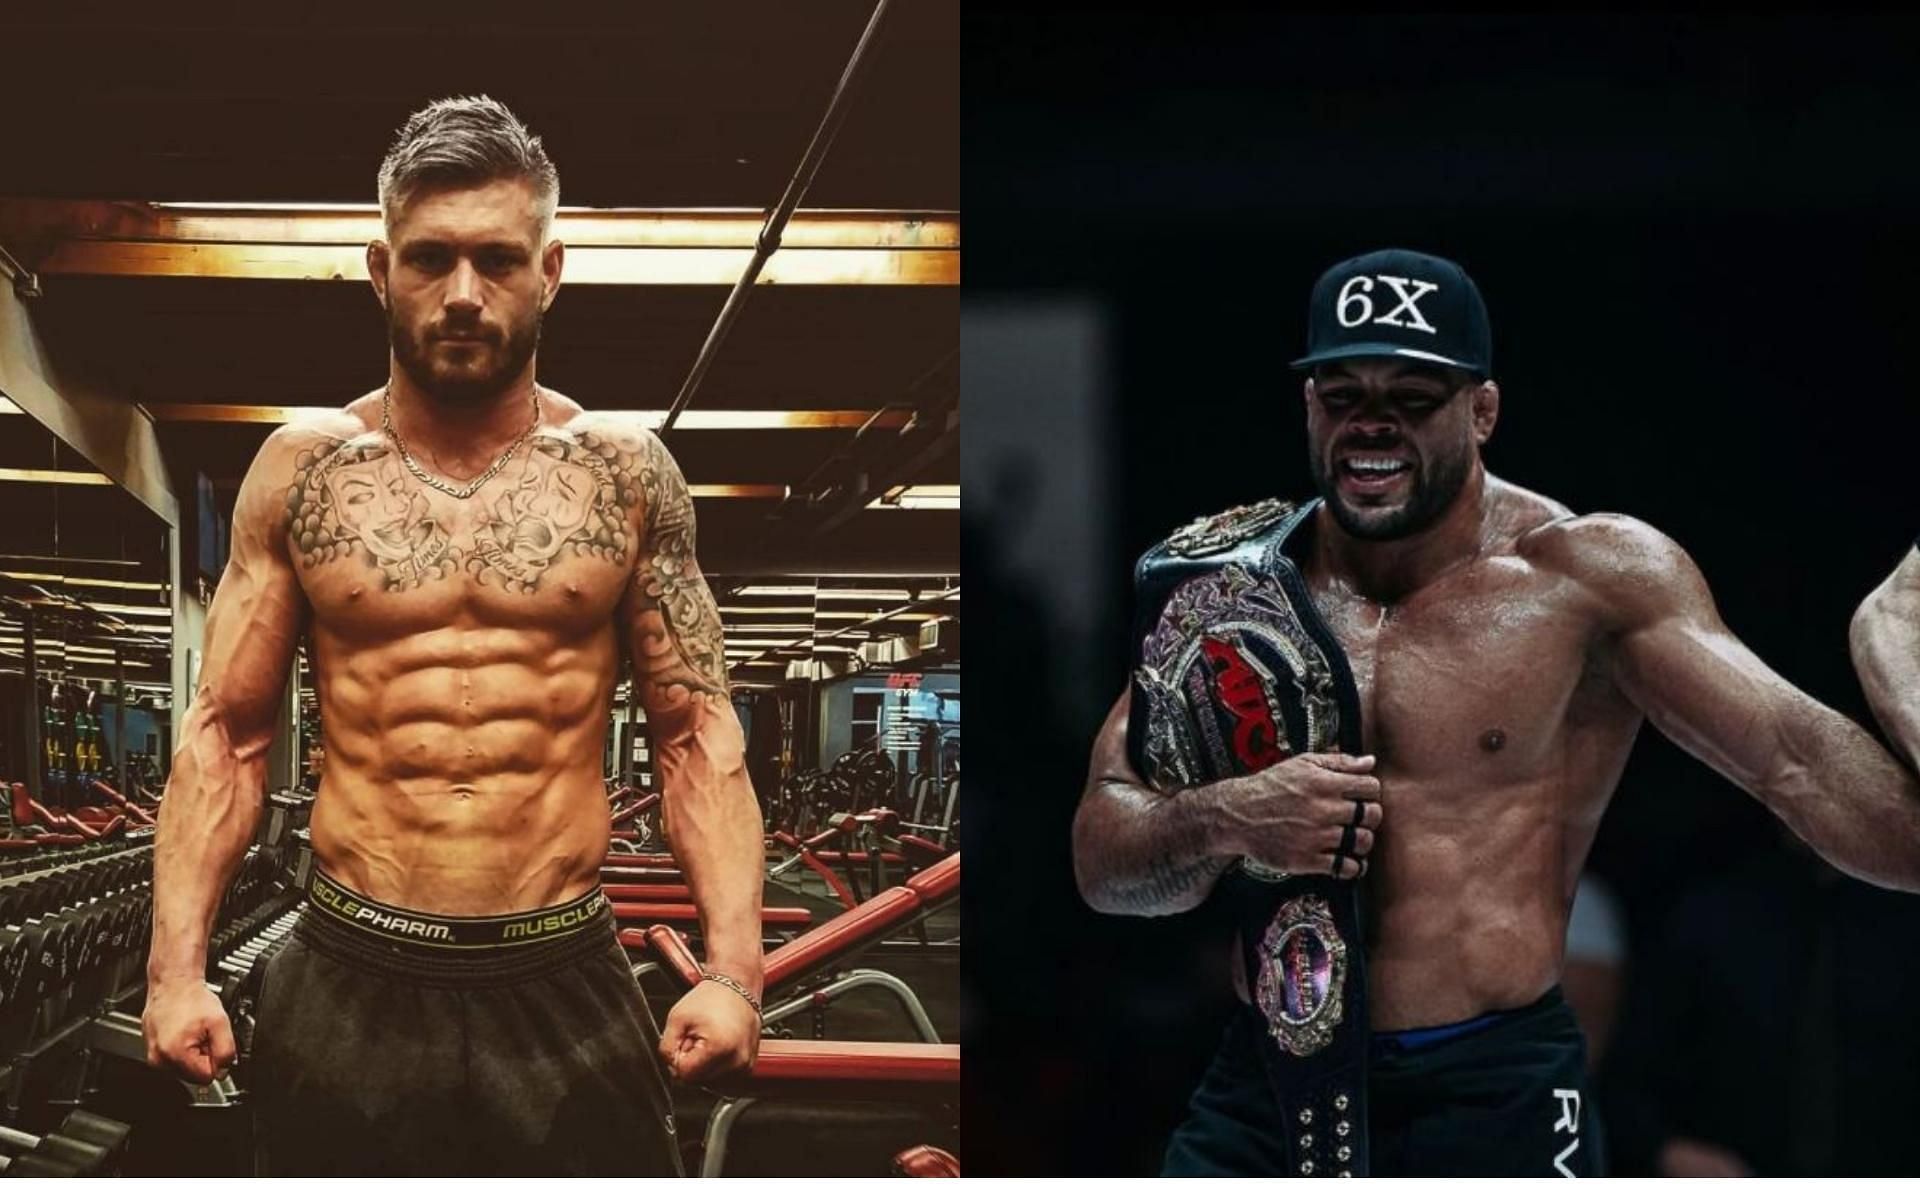 Jiu-jitsu icons and bitter rivals Gordon Ryan (left) and Andre Galvao (right) should settle their beef in a ONE Championship MMA fight. [Images Courtesy: @gordonlovesjiujitsu and @galvaobjj on Instagram]